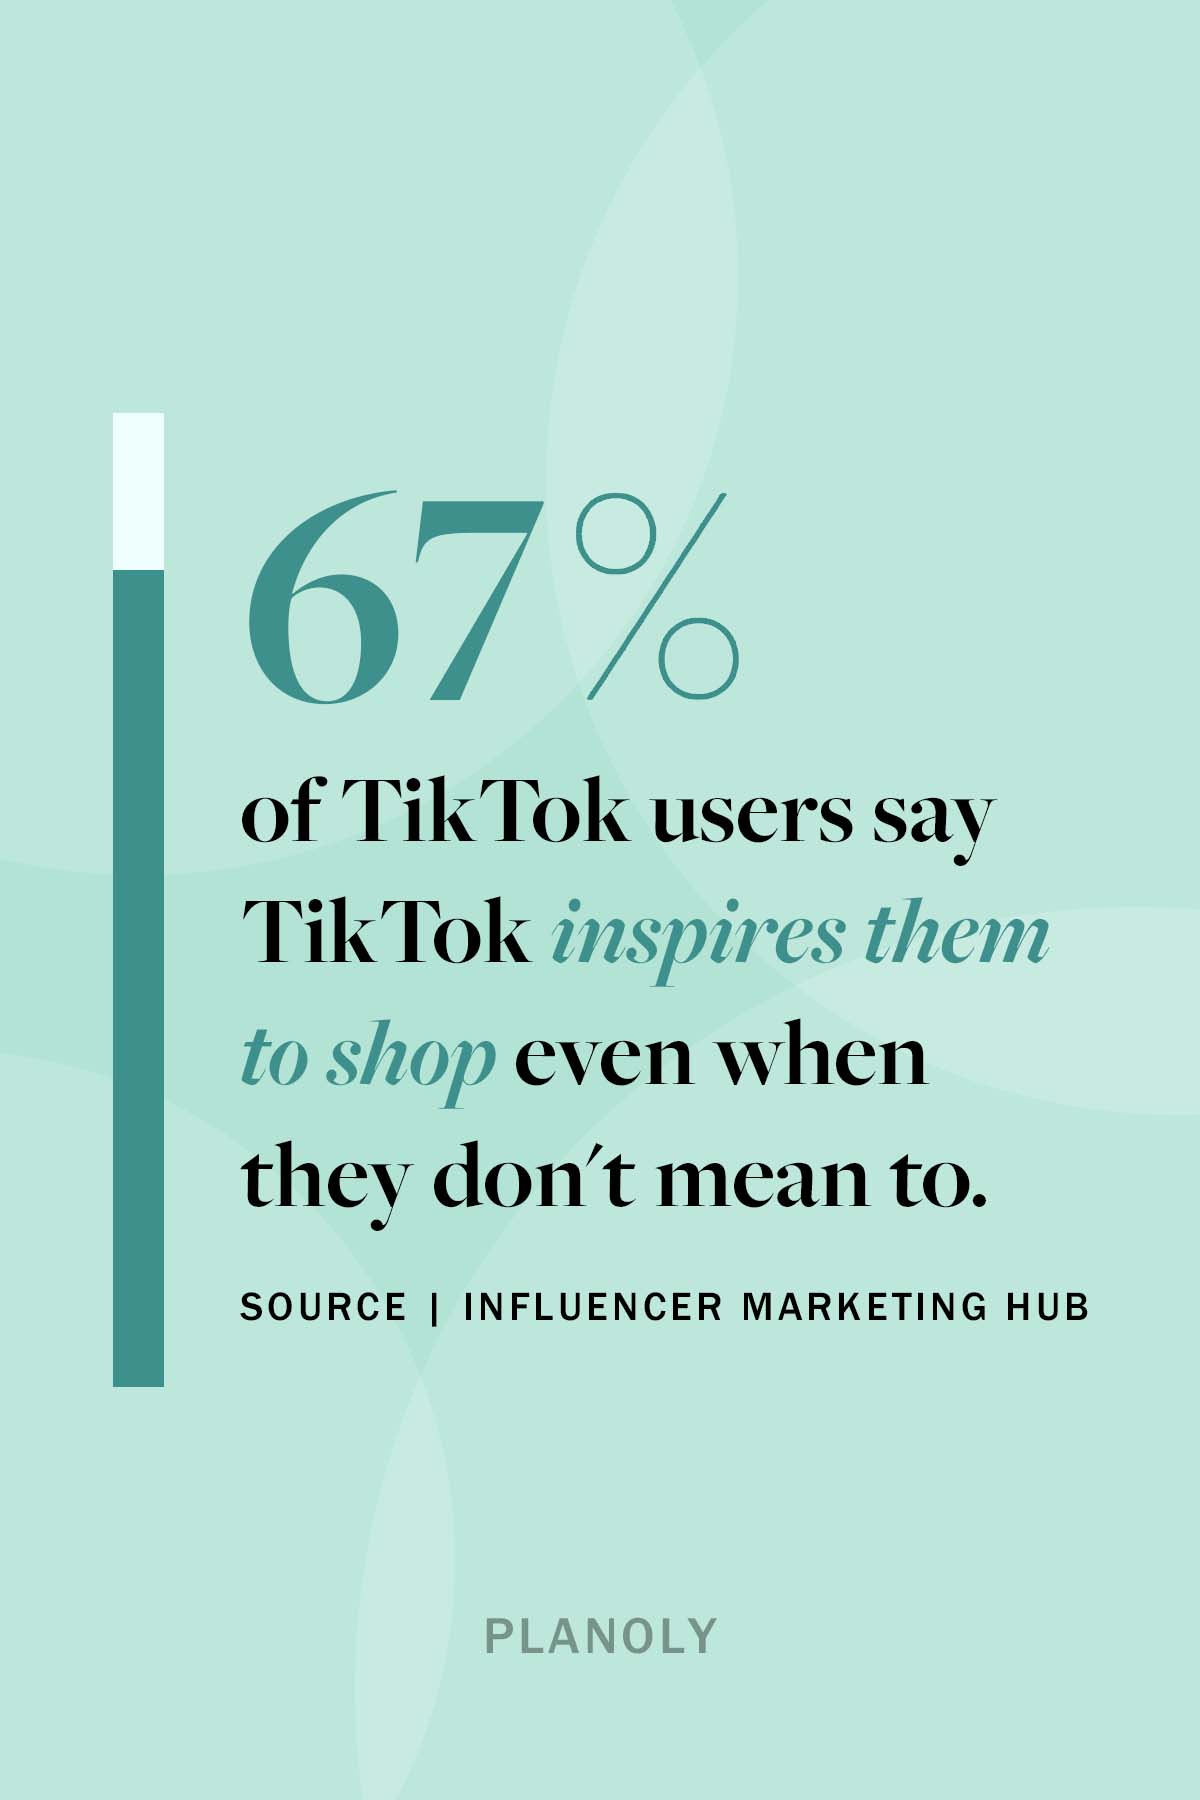 PLANOLY - Blog - How to use TikTok Live Shopping - Vertical Image